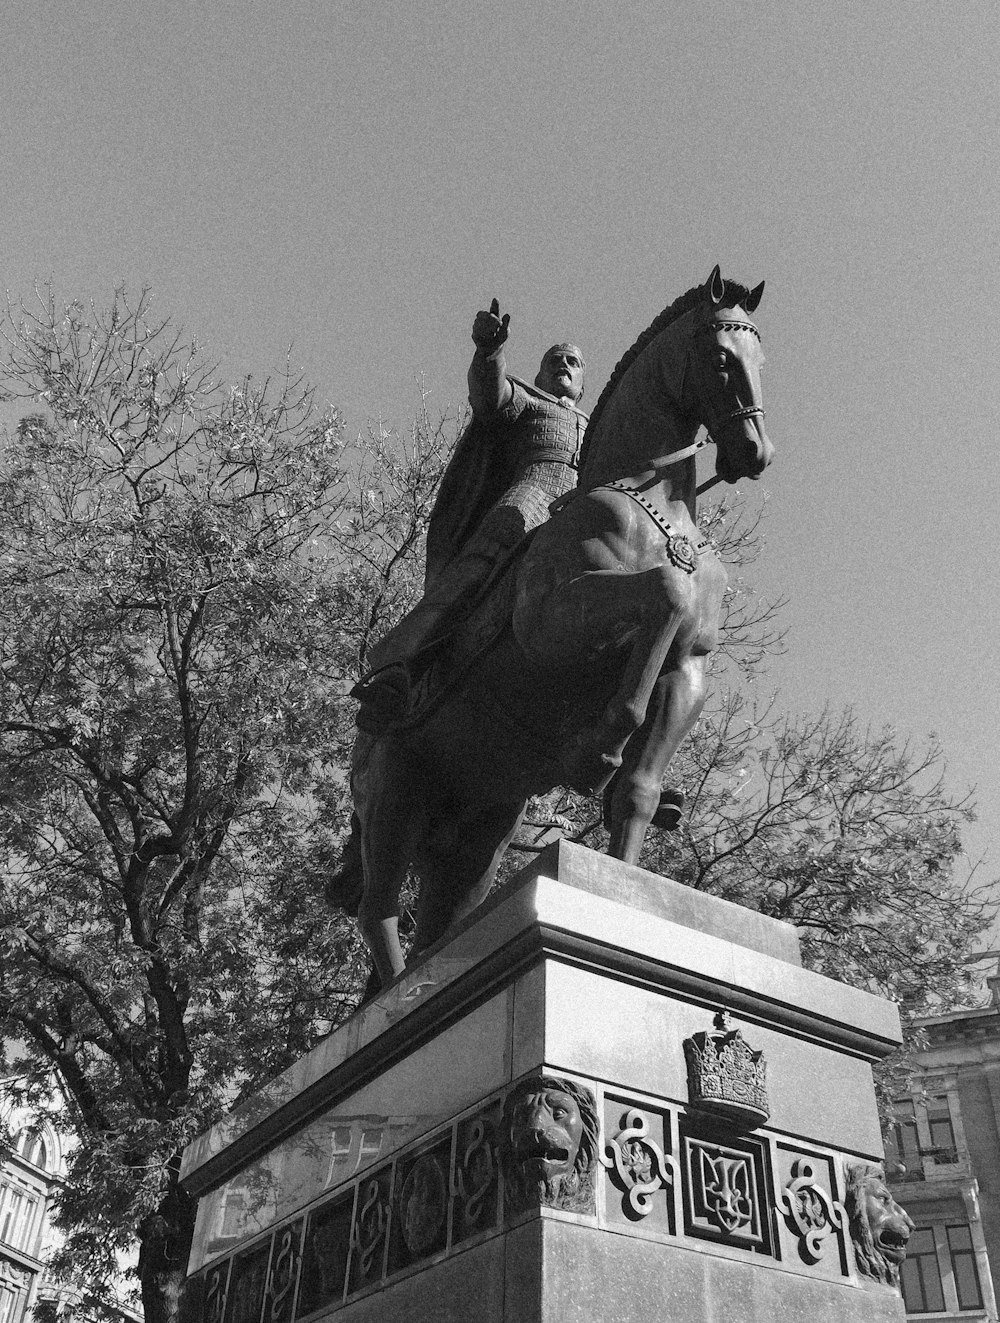 man riding horse statue in grayscale photography